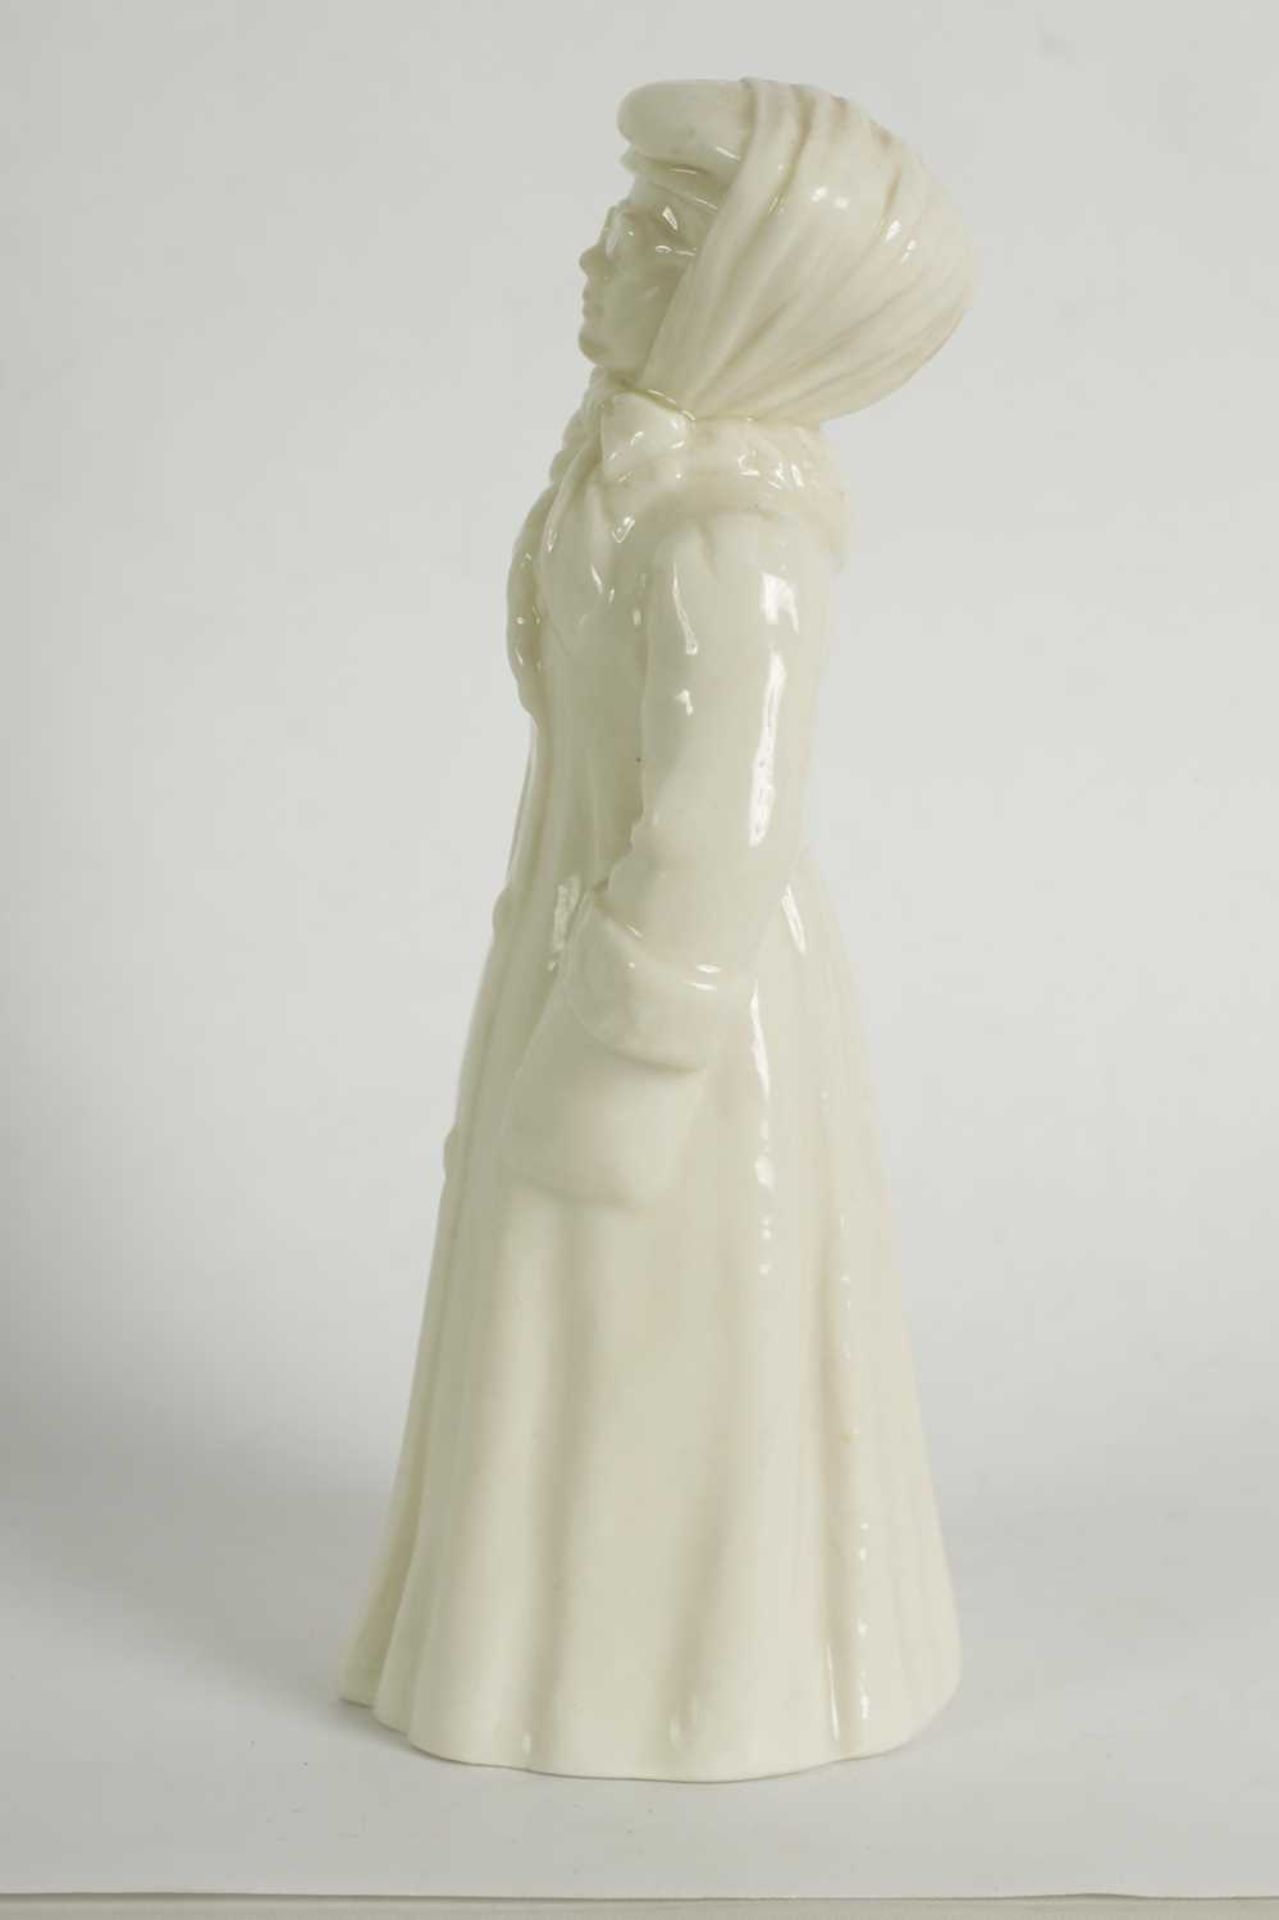 THE MOTORIST. A VERY RARE ROYAL WORCESTER PORCELAIN CANDLE EXTINGUISHER - Image 4 of 6